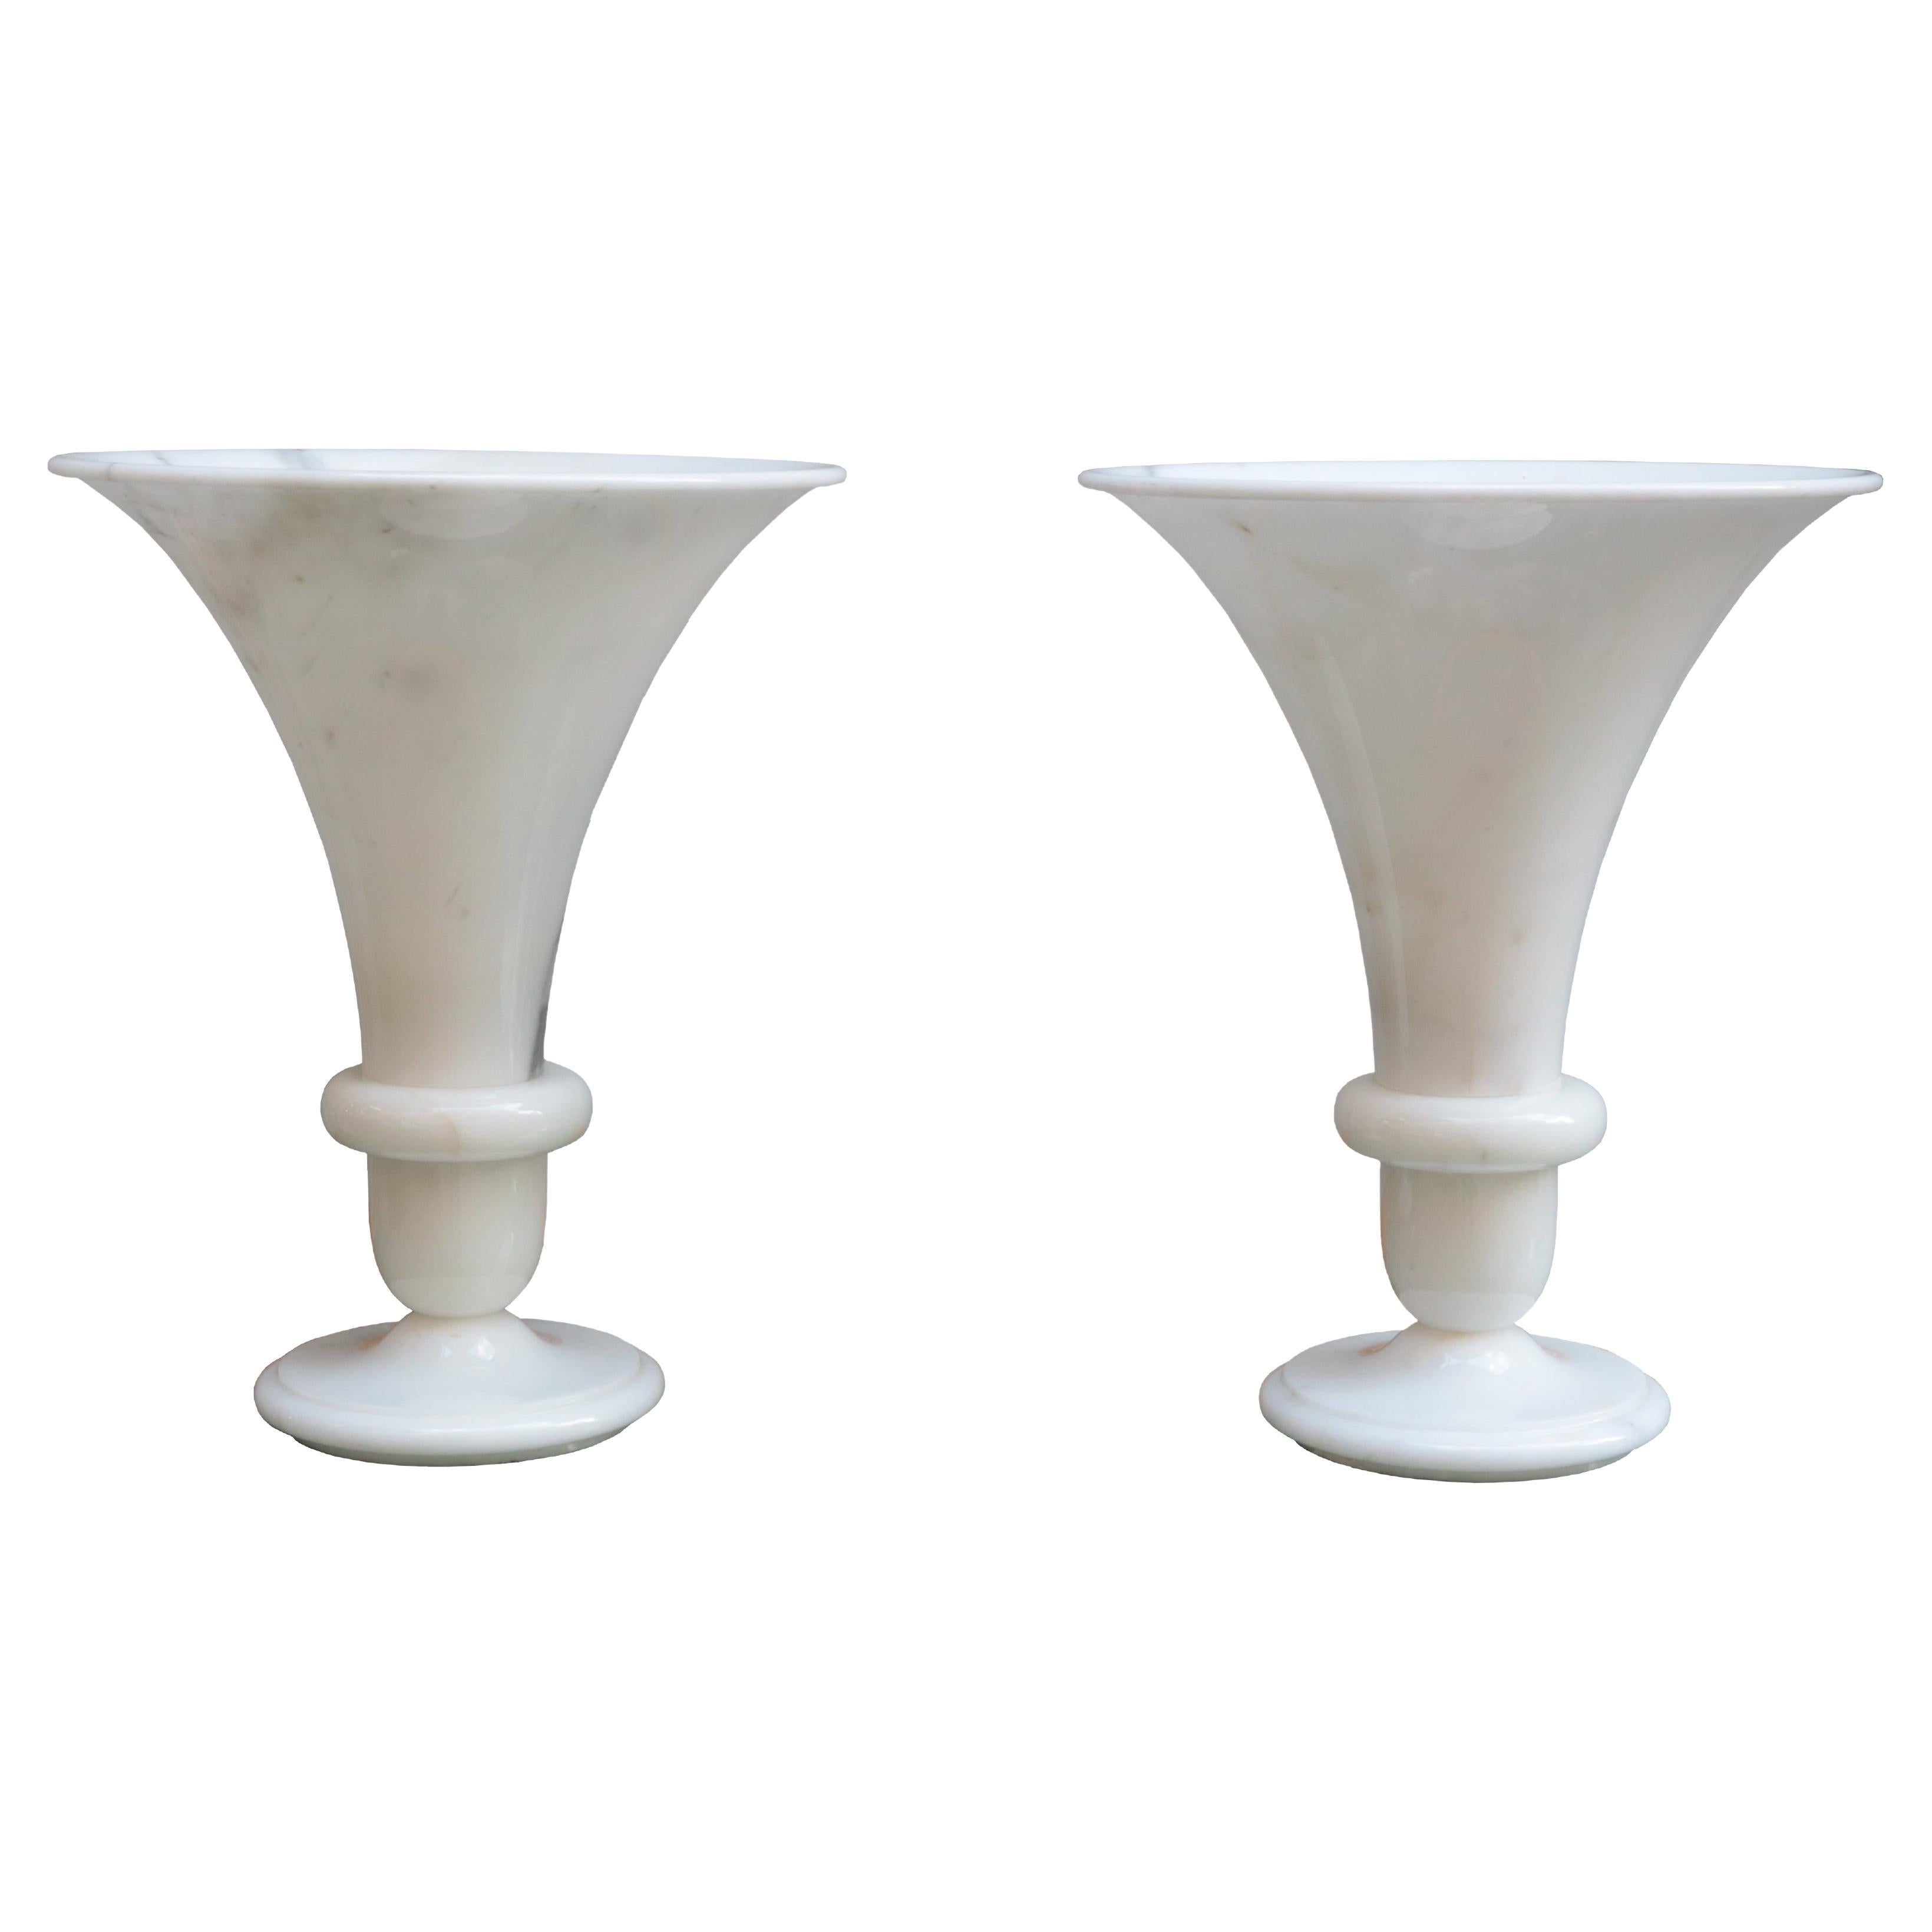 Pair of Polished Marble Table Lamps